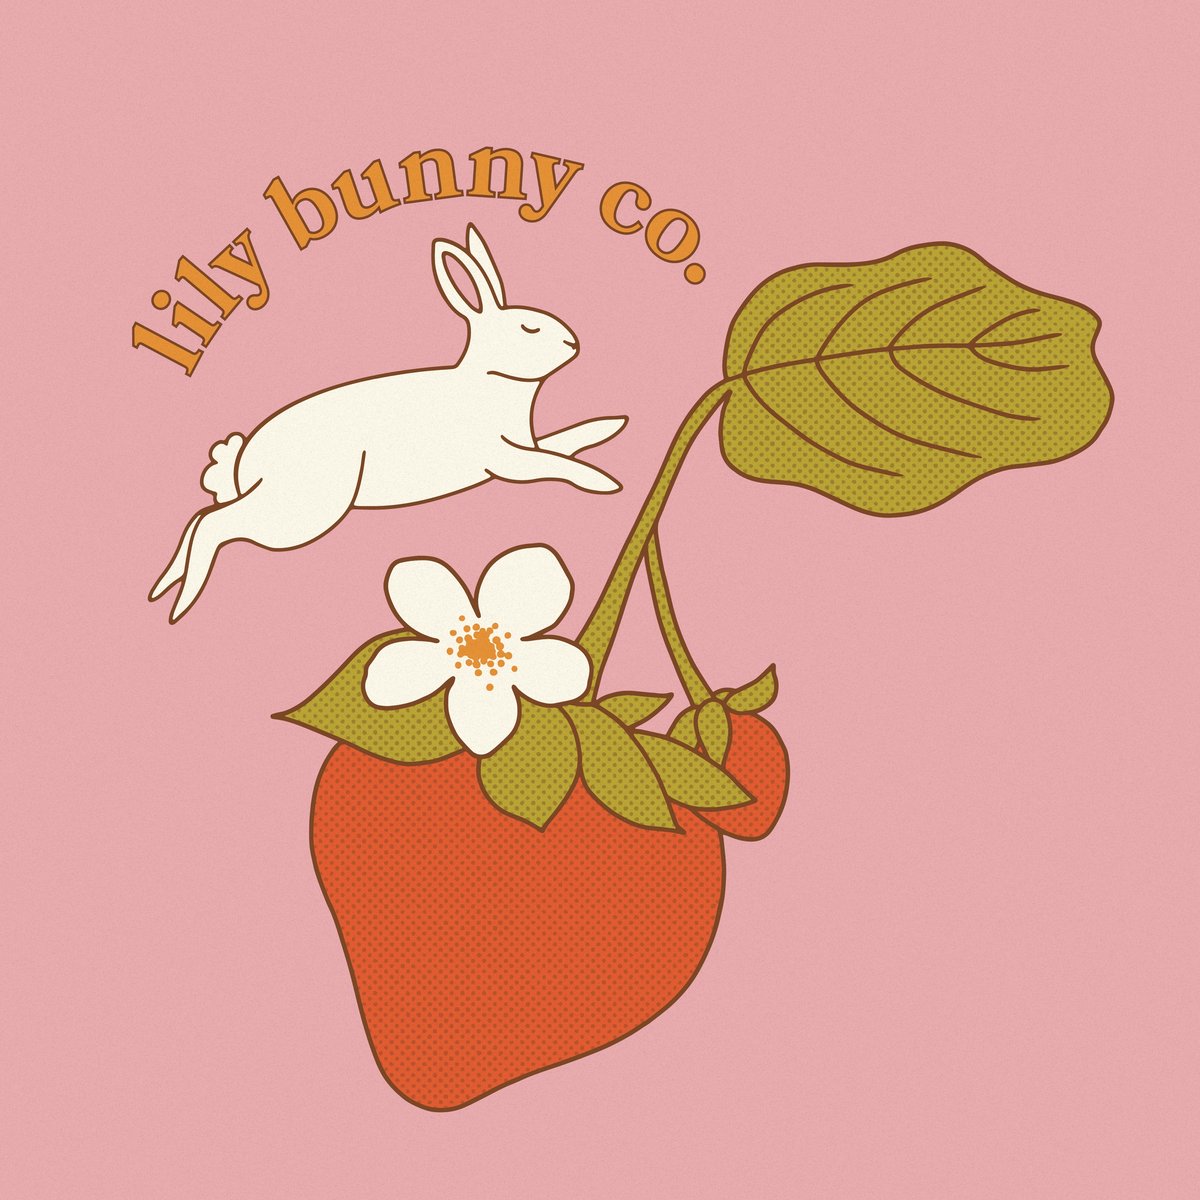 lily bunny co.